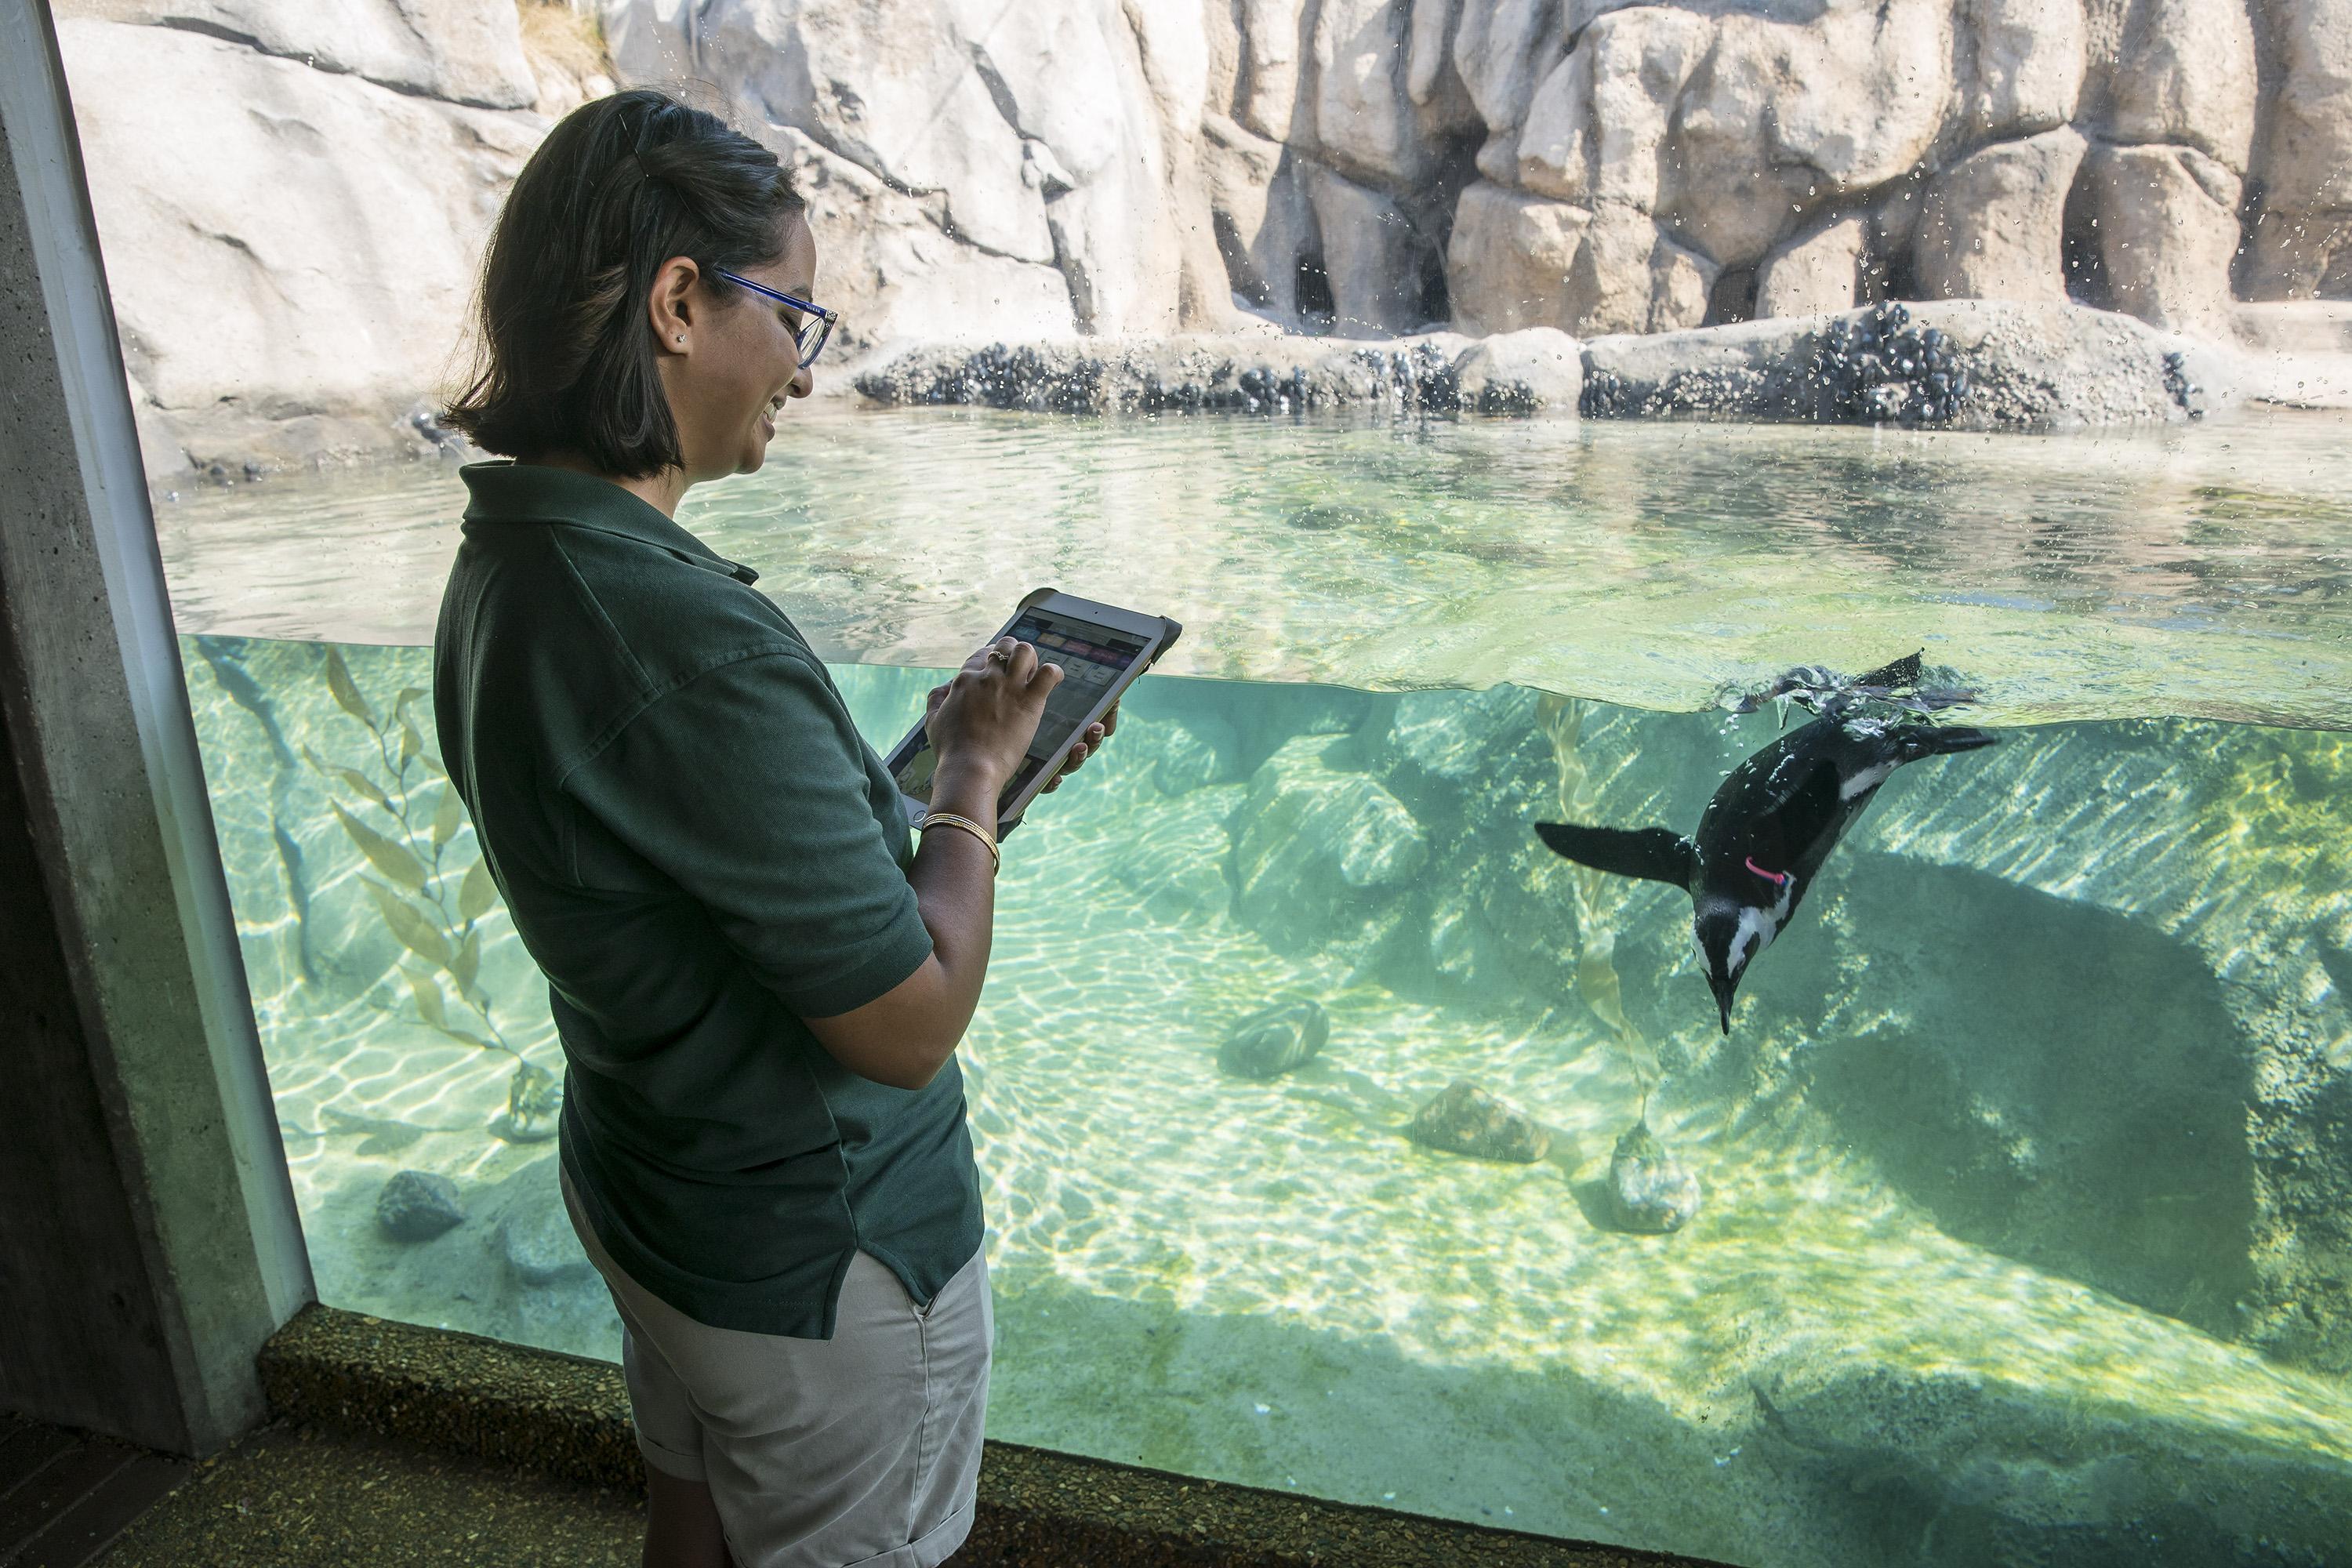 In 2017, a volunteer uses ZooMonitor, an app created by Lincoln Park Zoo to record animal behavioral data. (Todd Rosenberg / Lincoln Park Zoo)